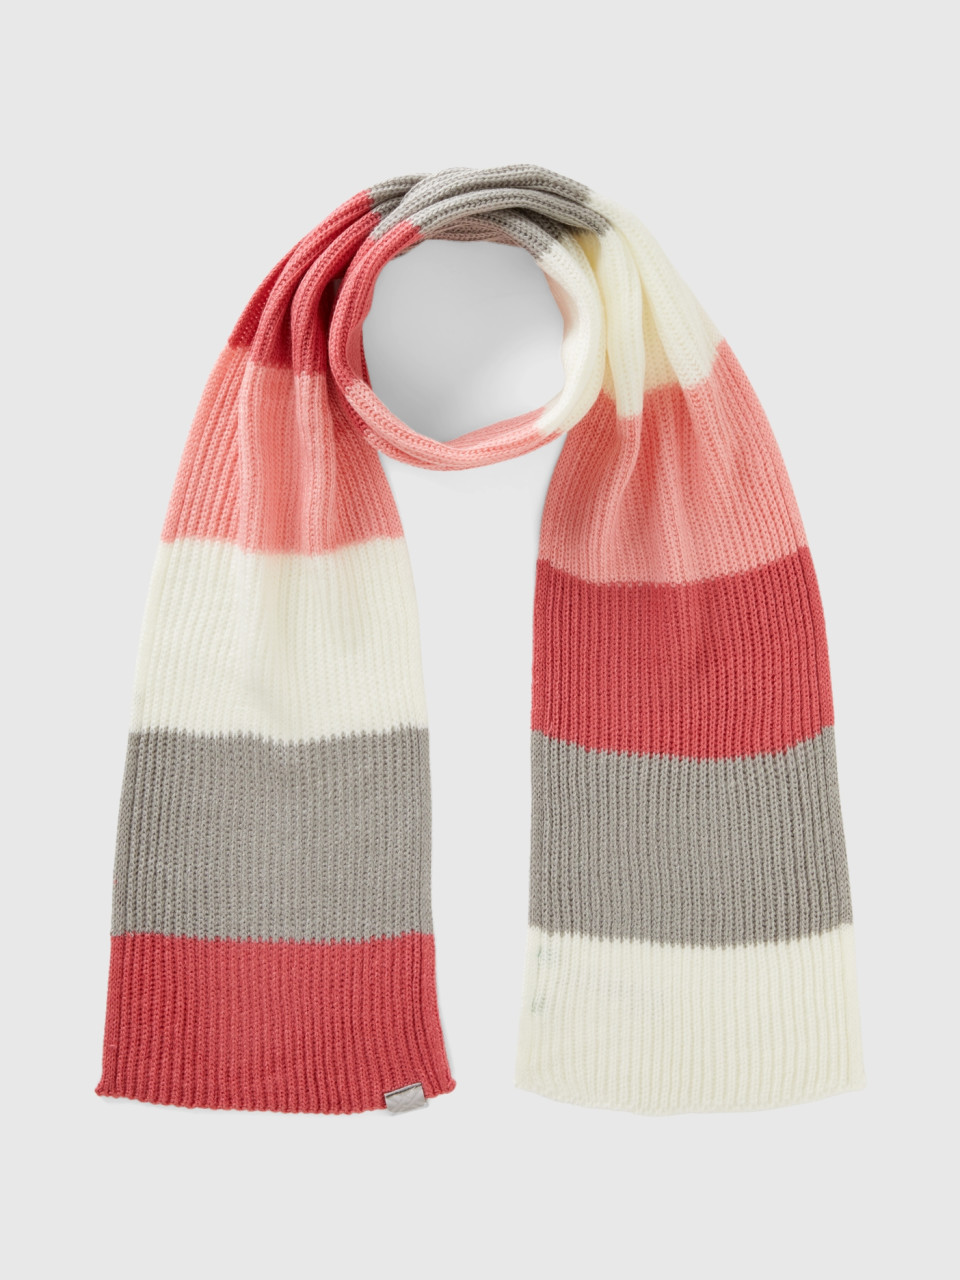 Benetton, Scarf With Multicolor Stripes, Salmon, Kids